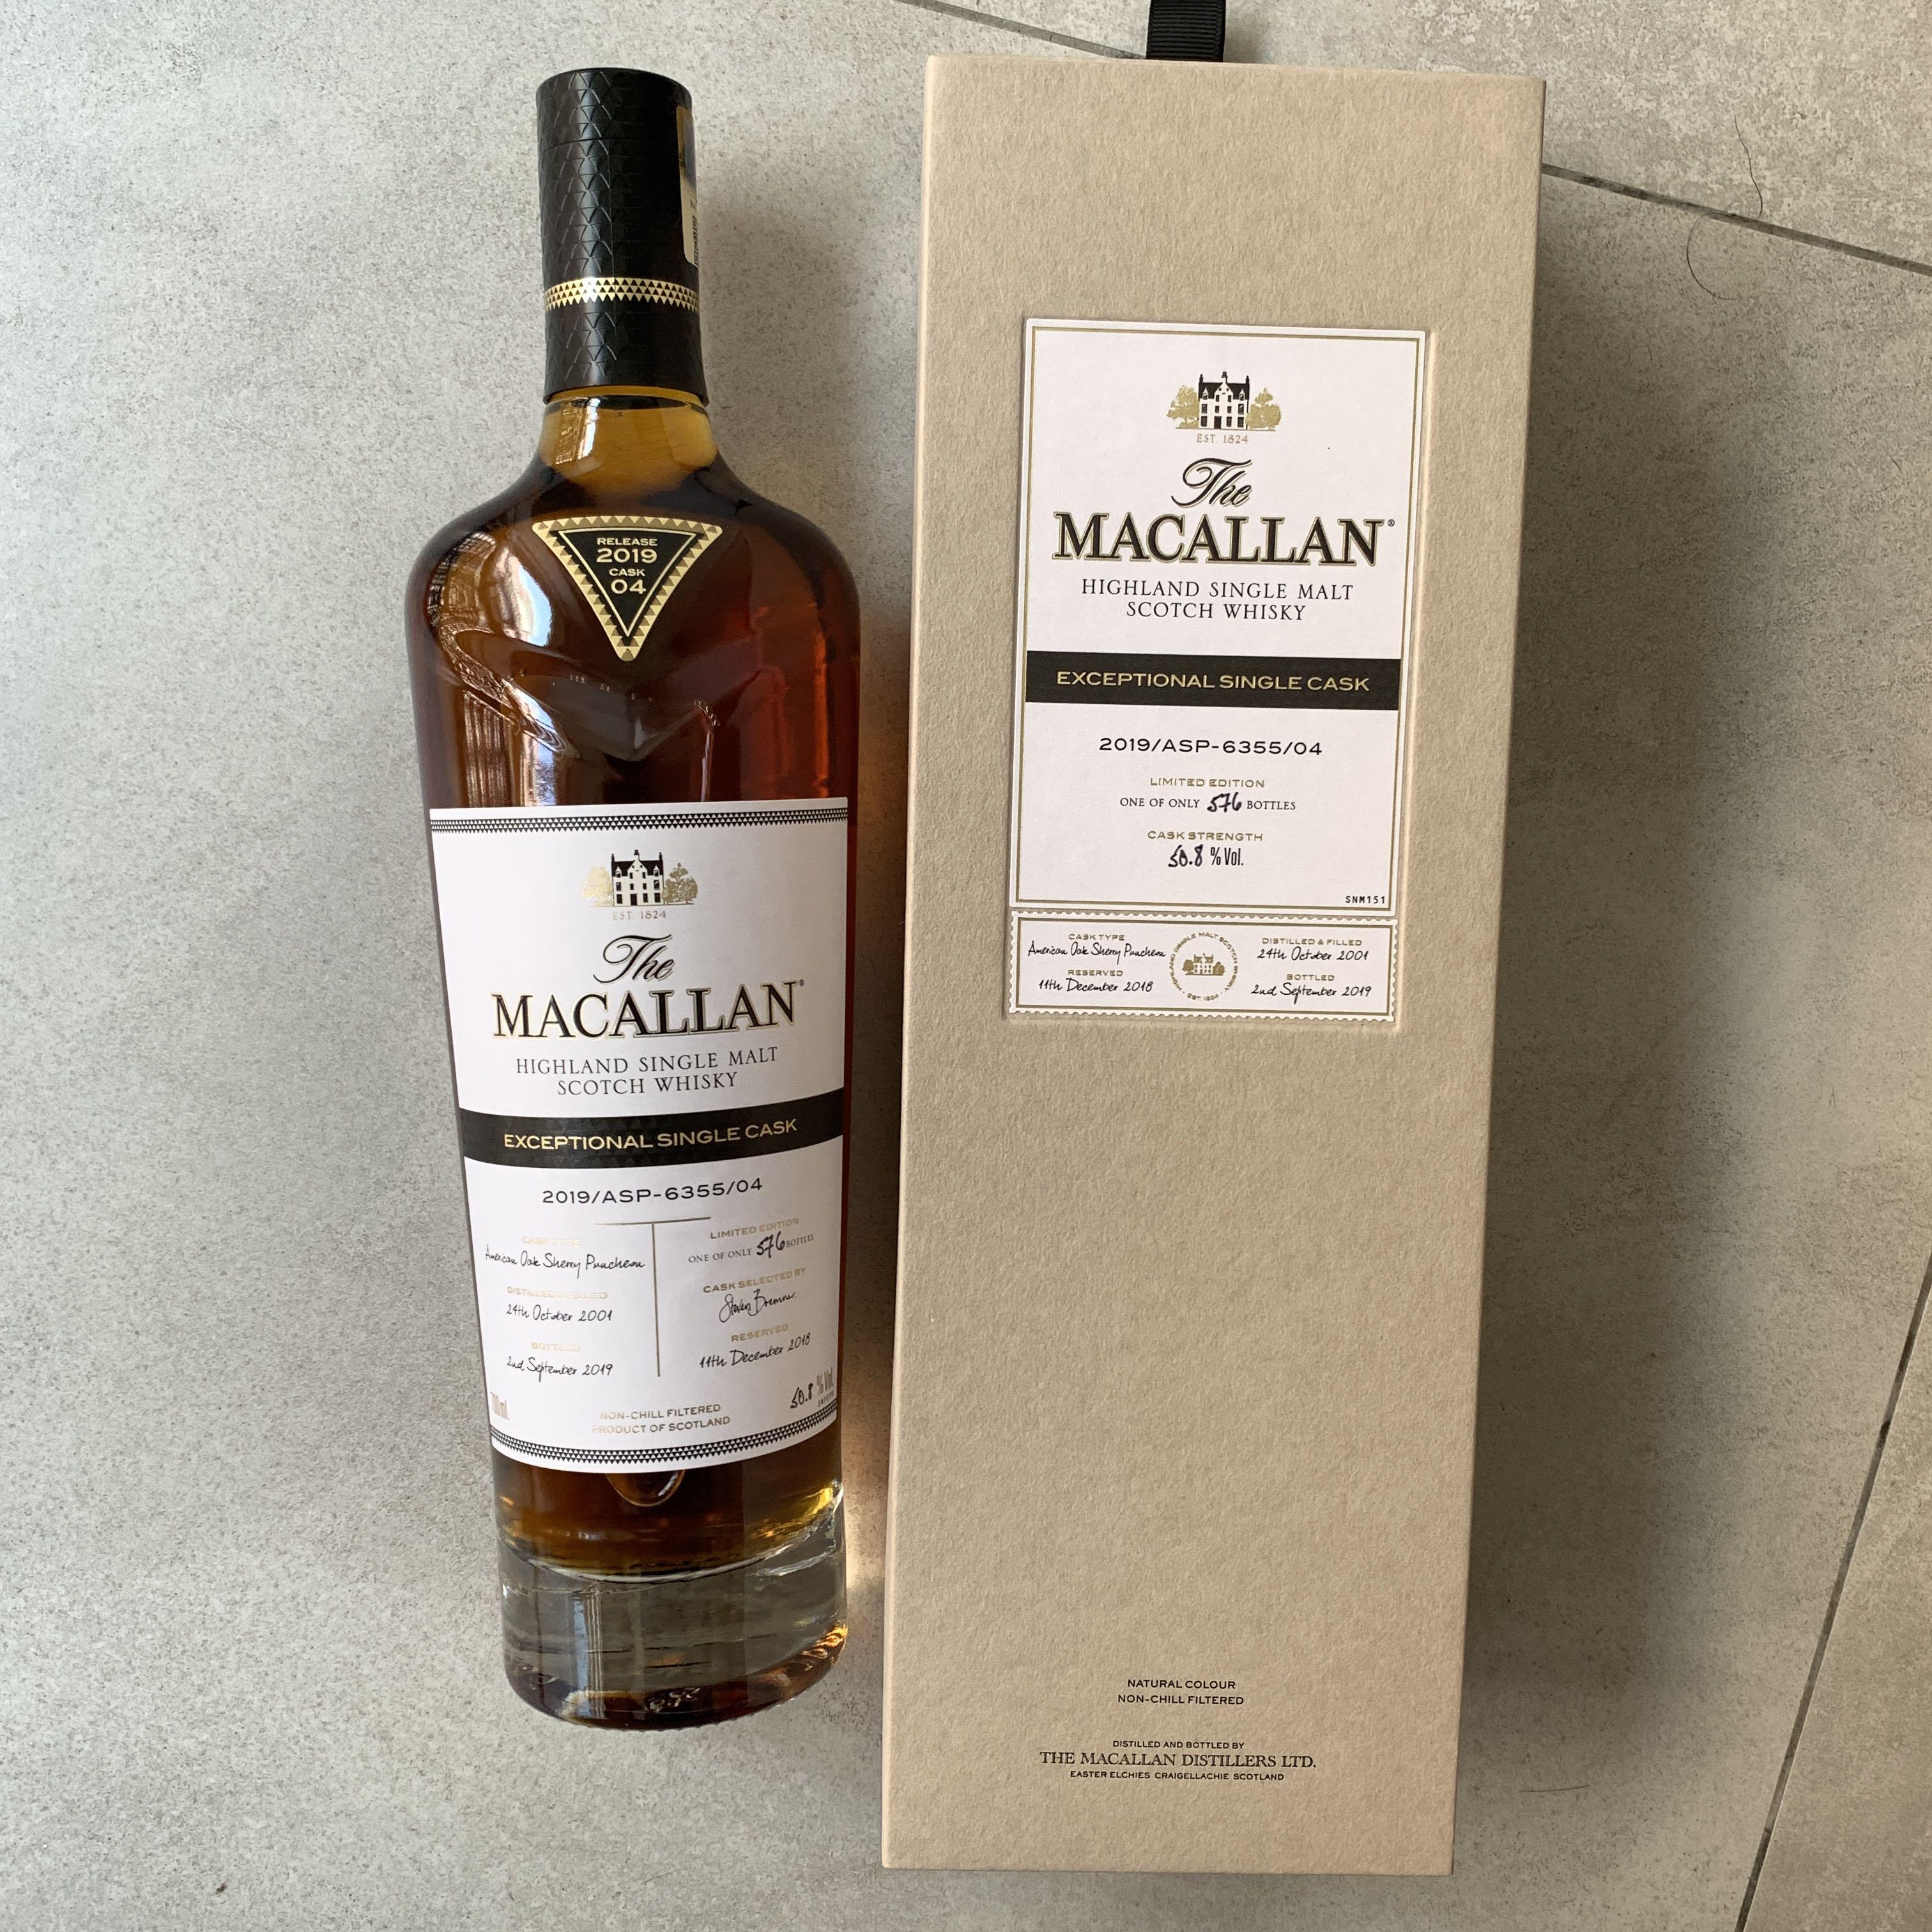 Macallan Exceptional Single Cask Food Drinks Beverages On Carousell